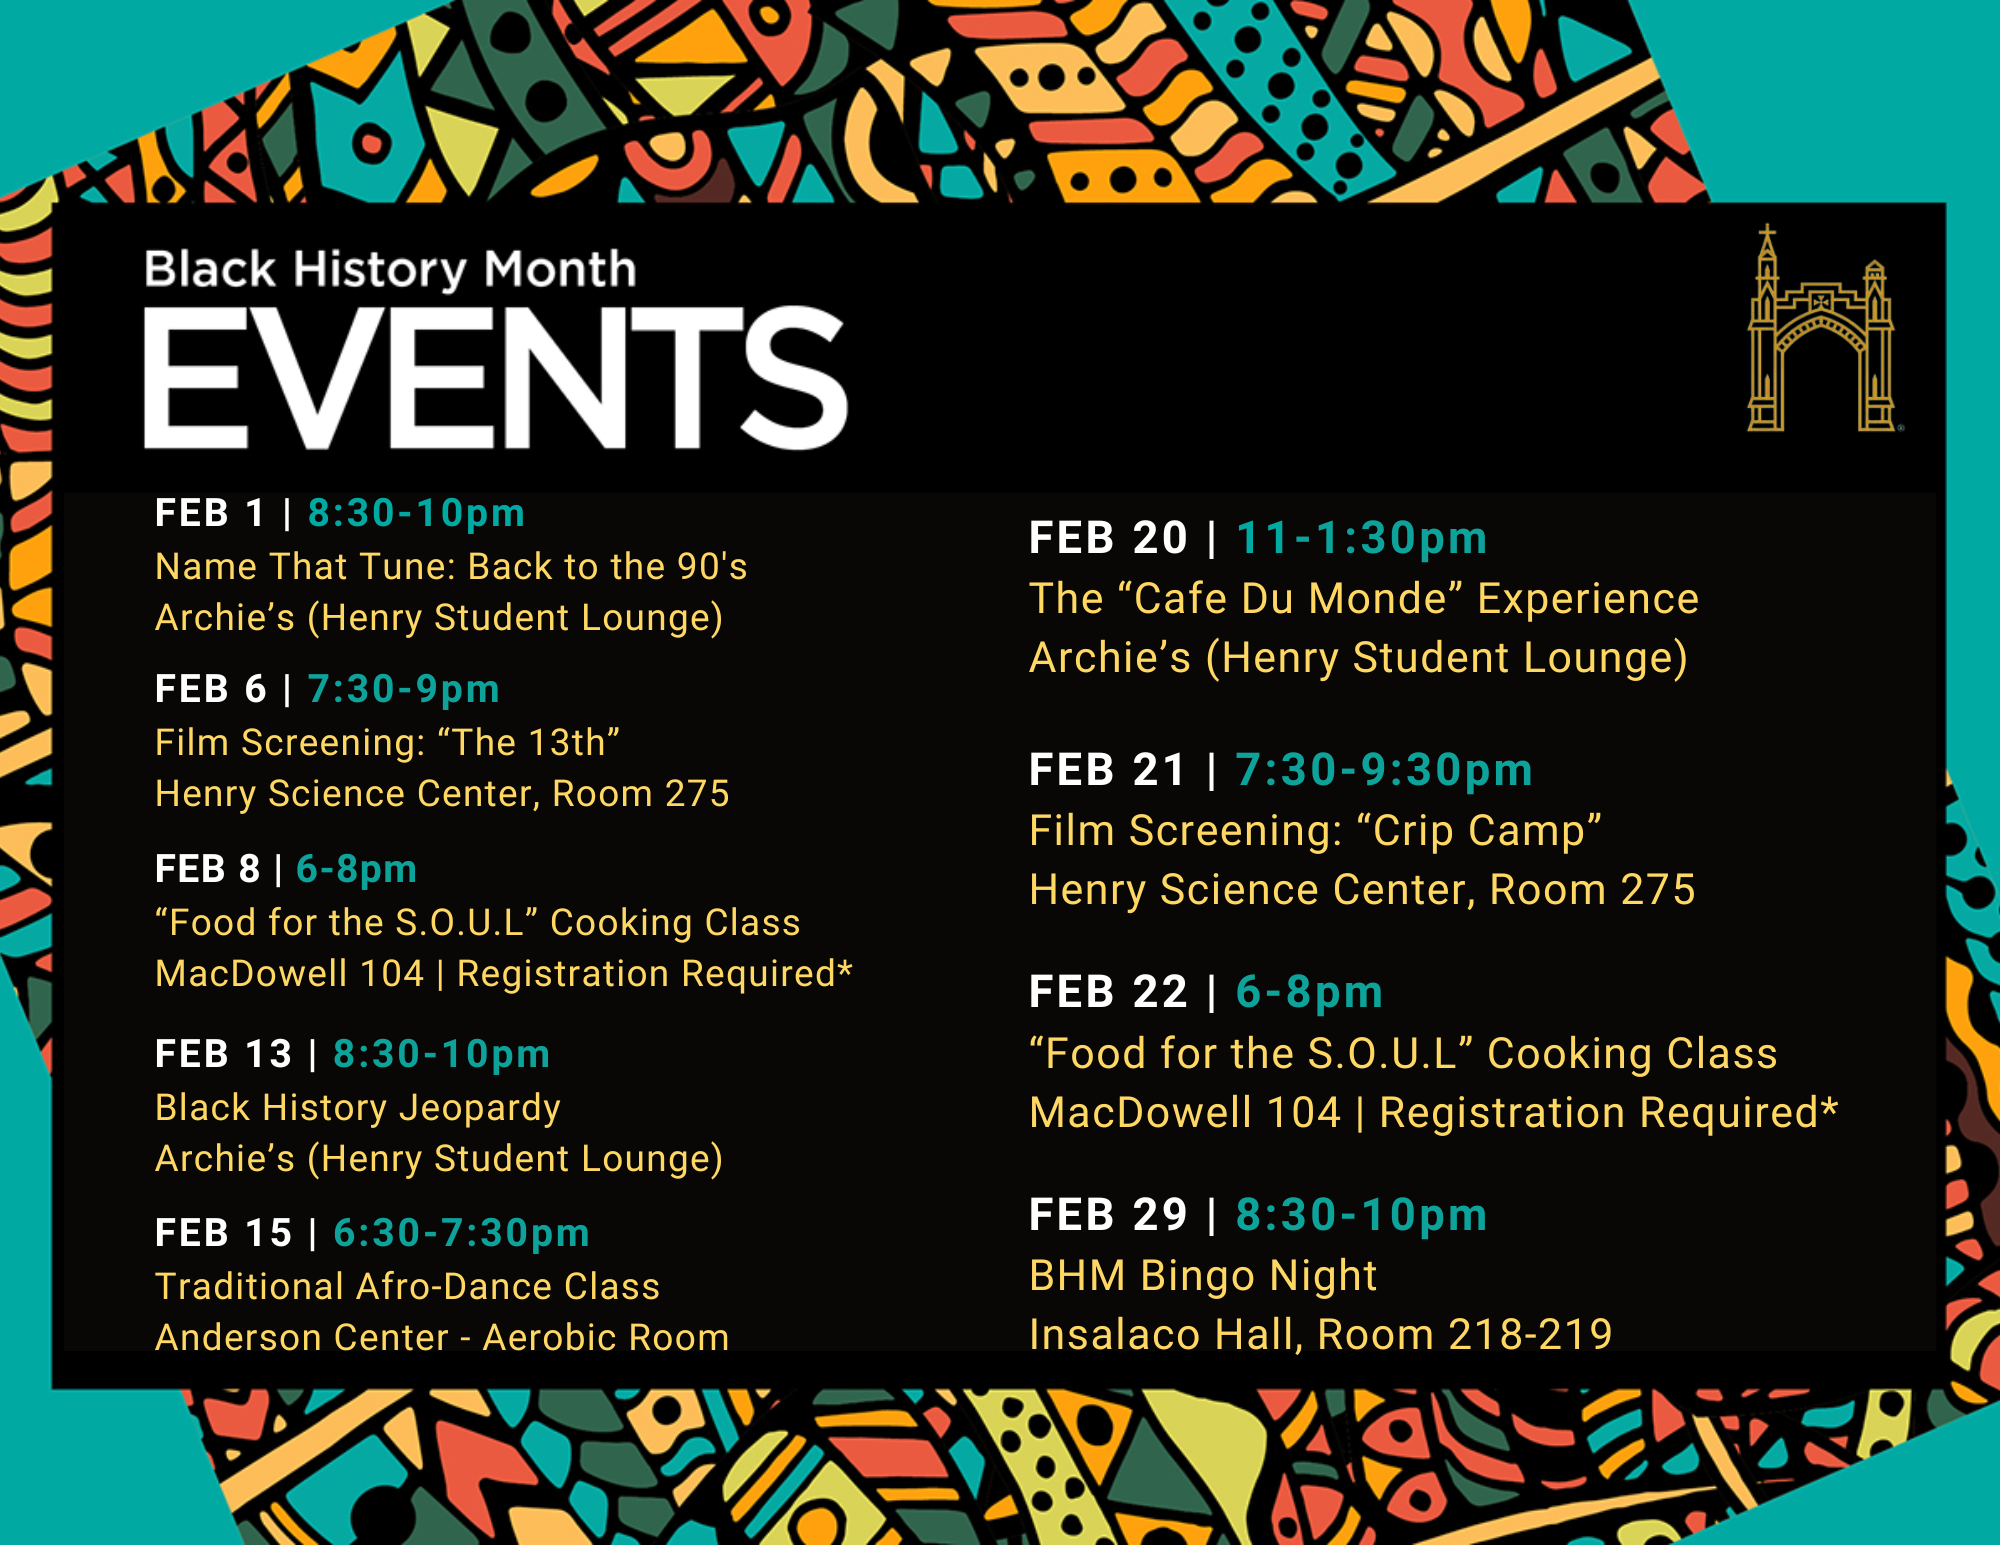 A list of events prepared for Black History Month with times and descriptions. 